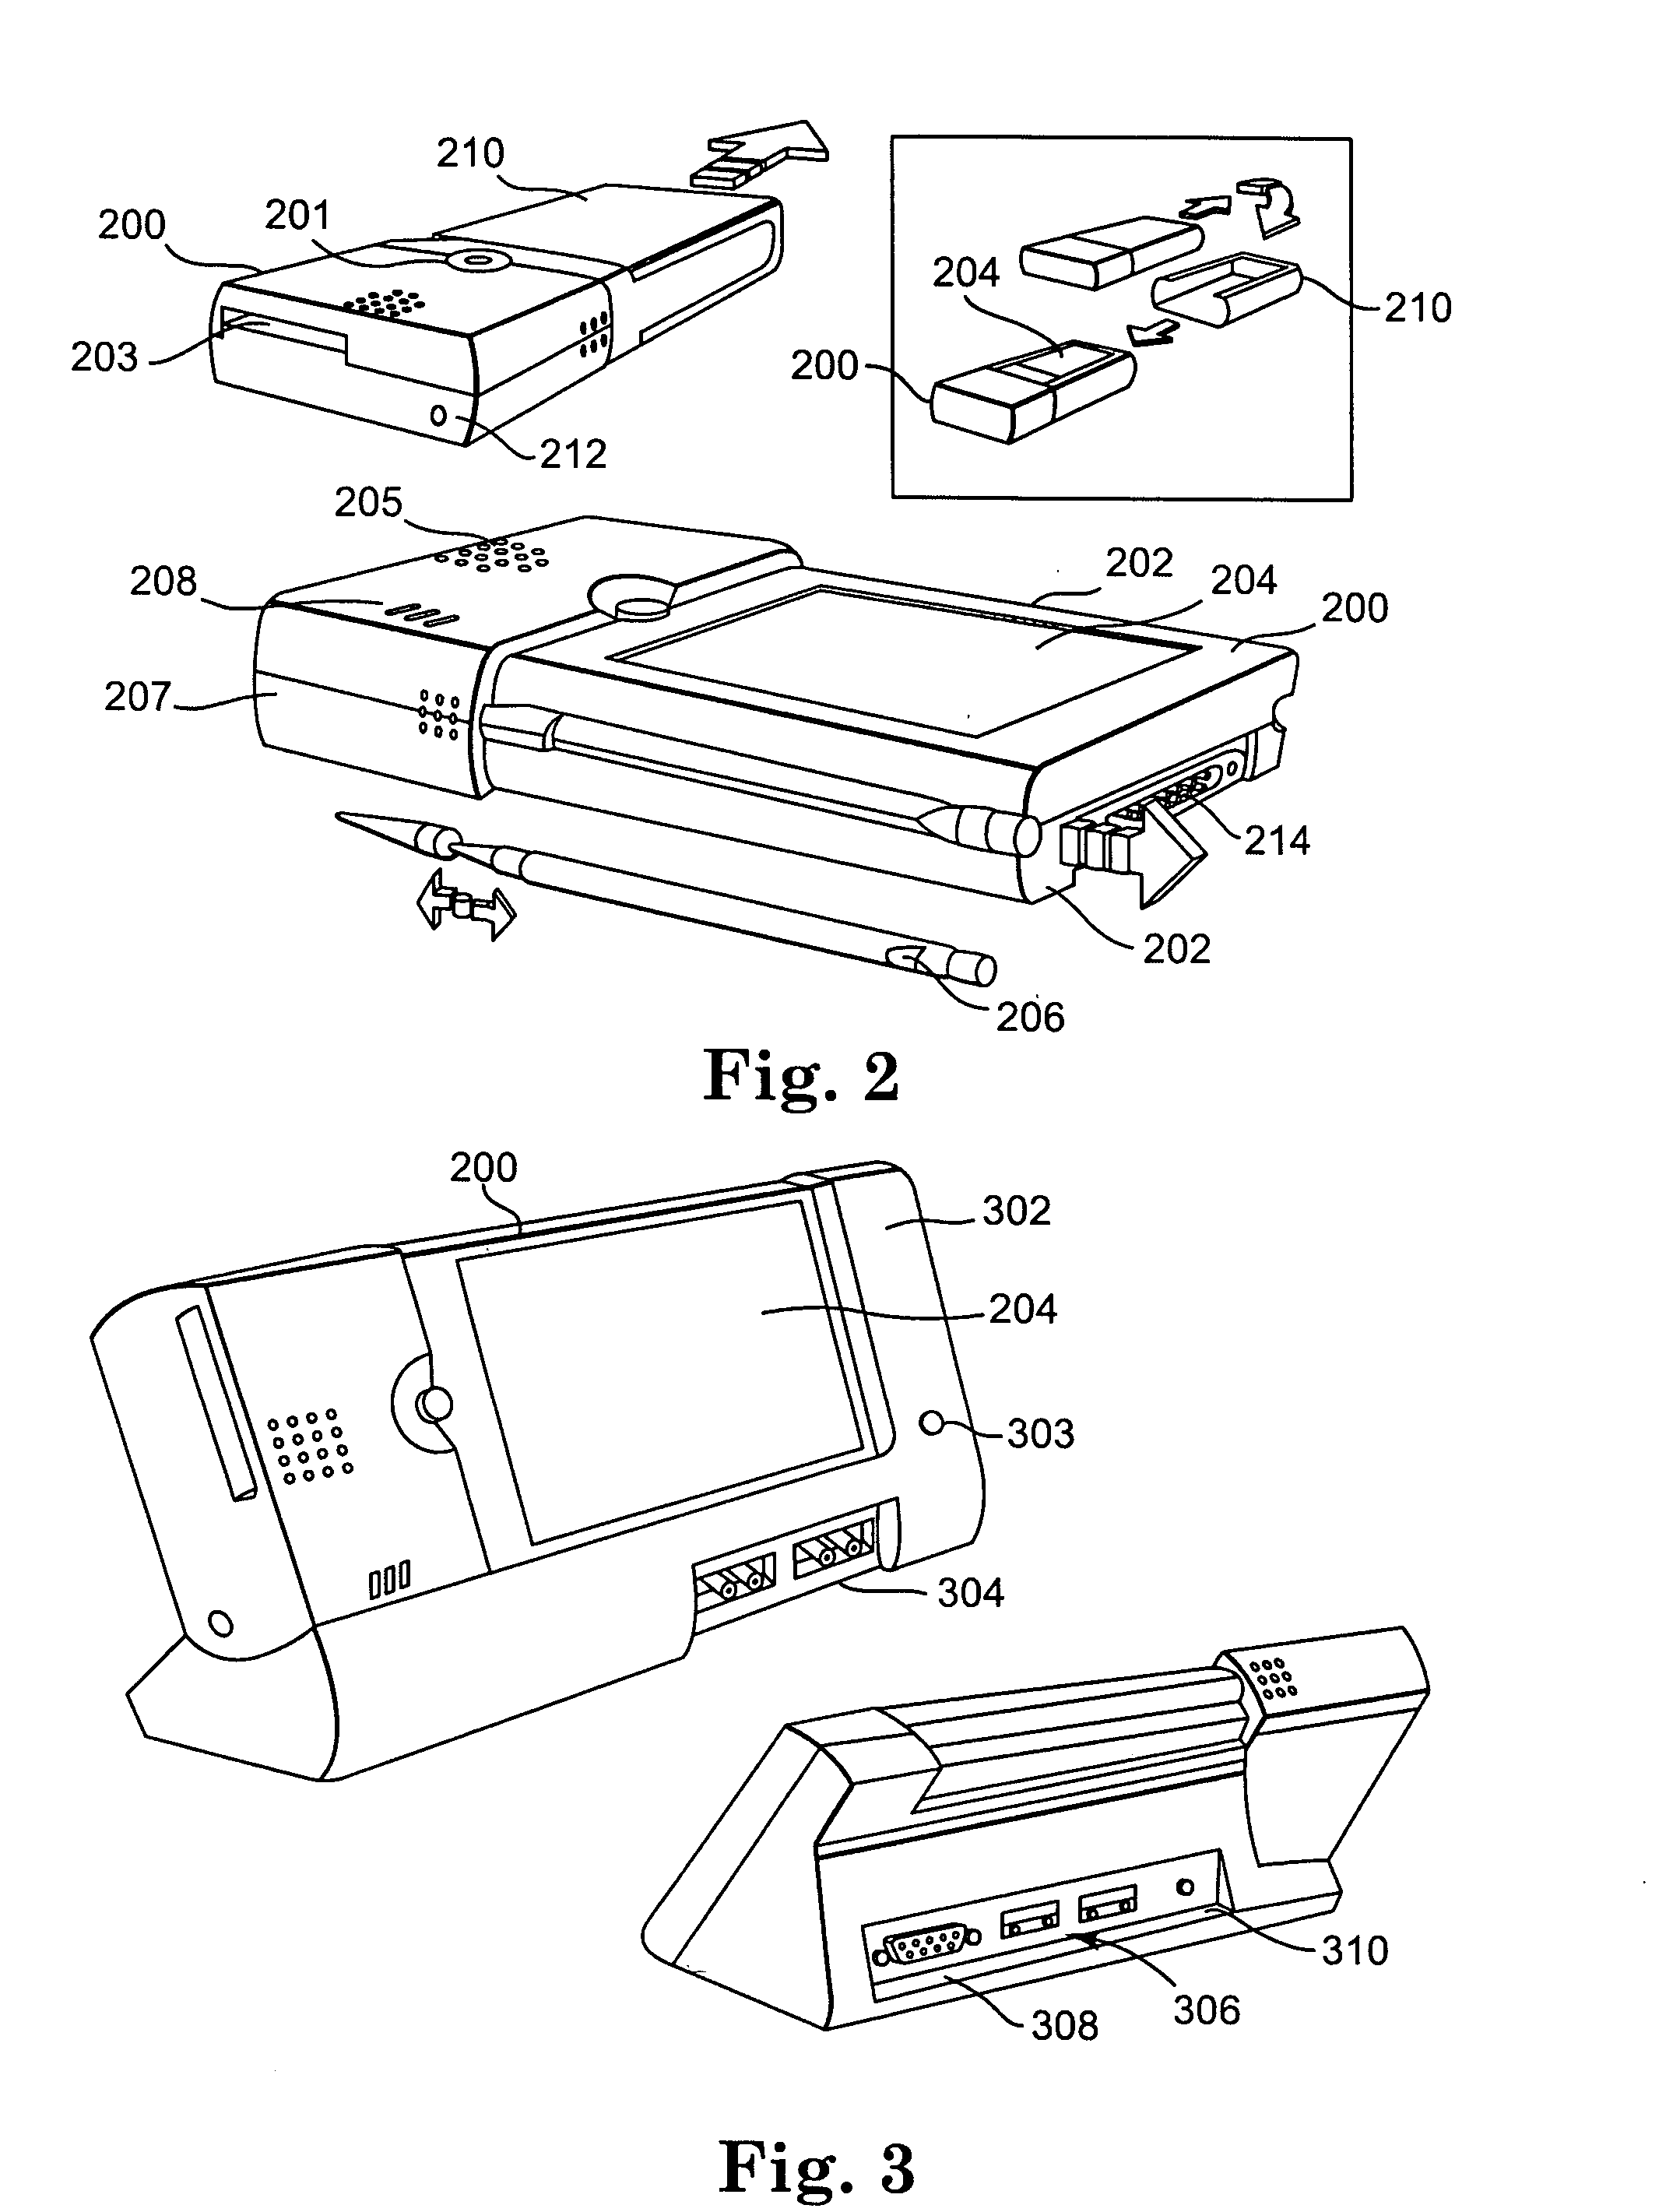 Apparatus and method for mobile medical services